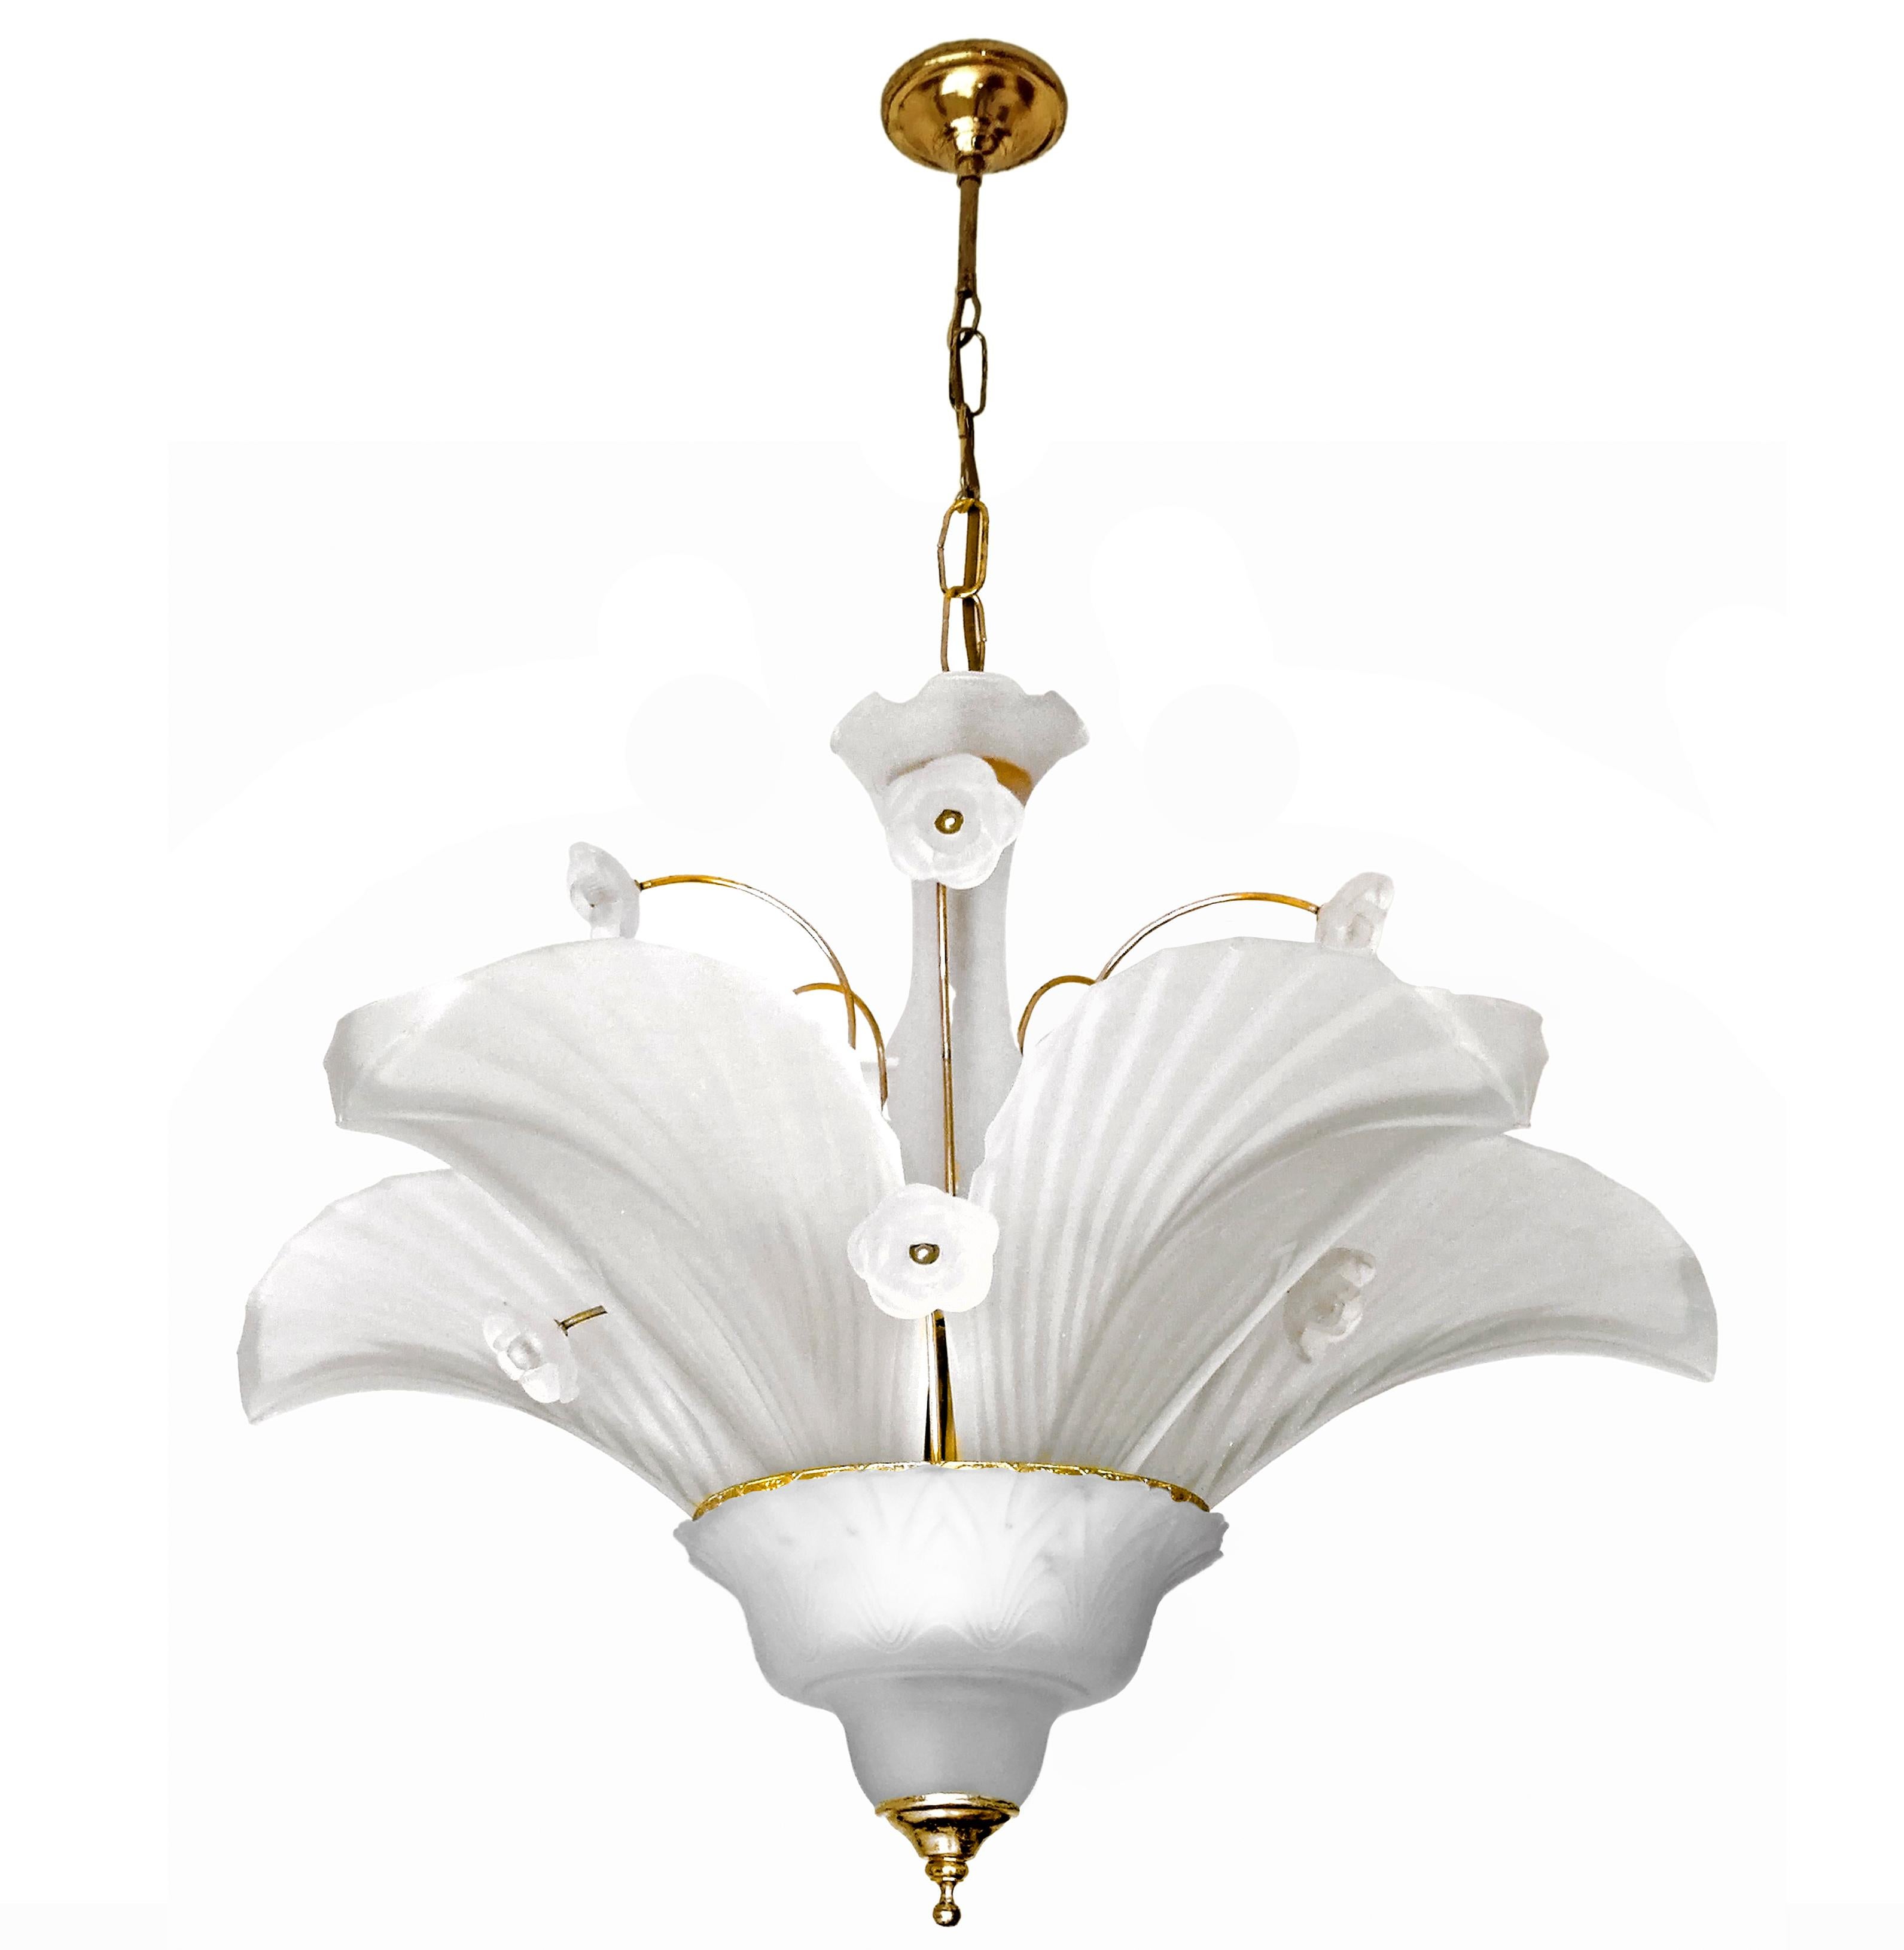 French Art Deco frosted glass leaves lamp shades chandelier.
Dimensions
Height: 35.44 in. ( 6.69 in/chain)/ 90 cm (17 cm/chain)
Diameter: 25.2 in. (64 cm)
5 light bulbs E14 good working condition.
Assembly required.
  